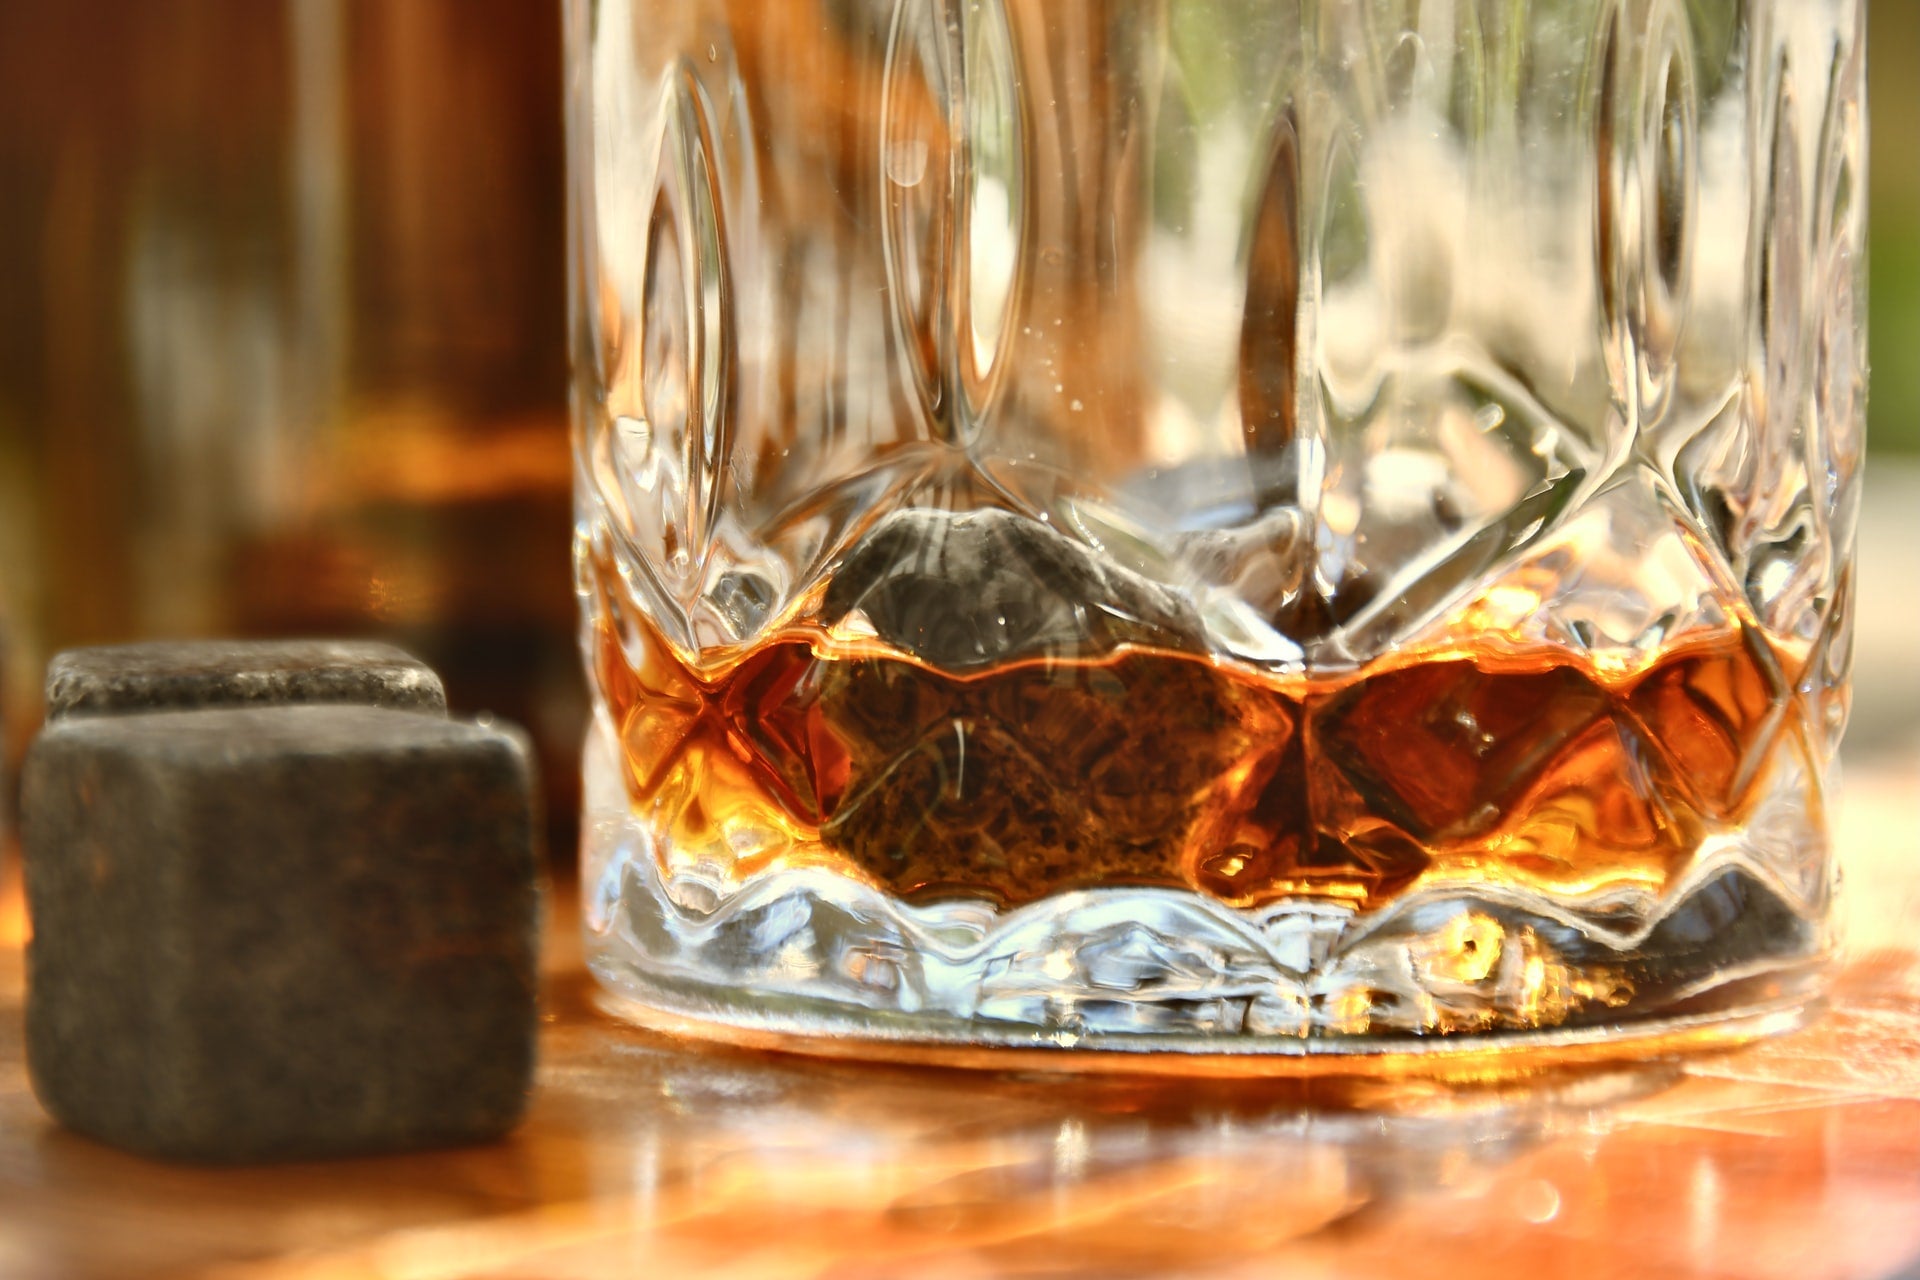 whisky stones placed in a glass of whisky